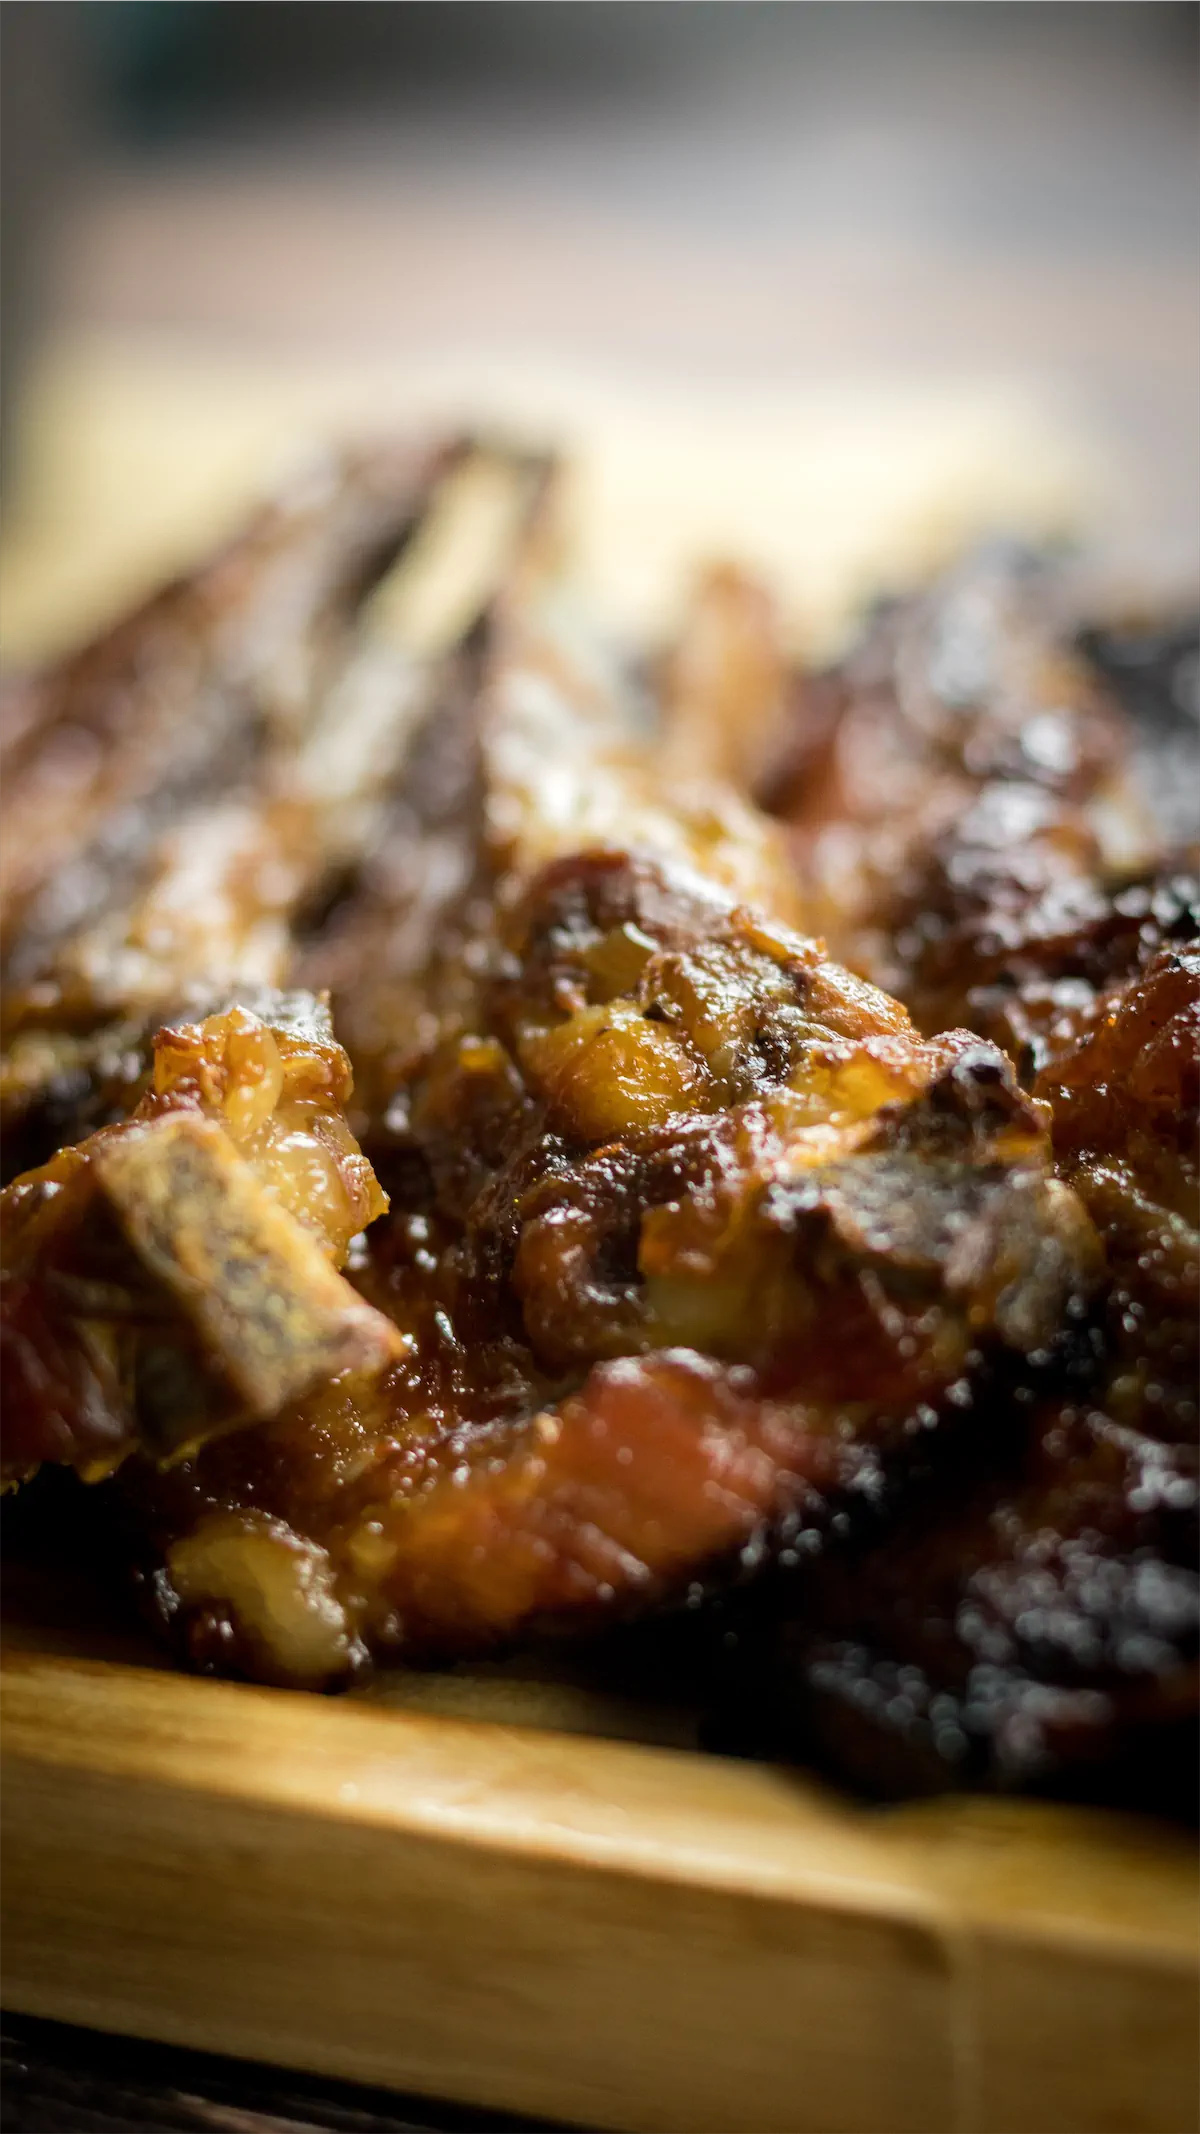 A close-up picture of smoked pork ribs showing it's texture.